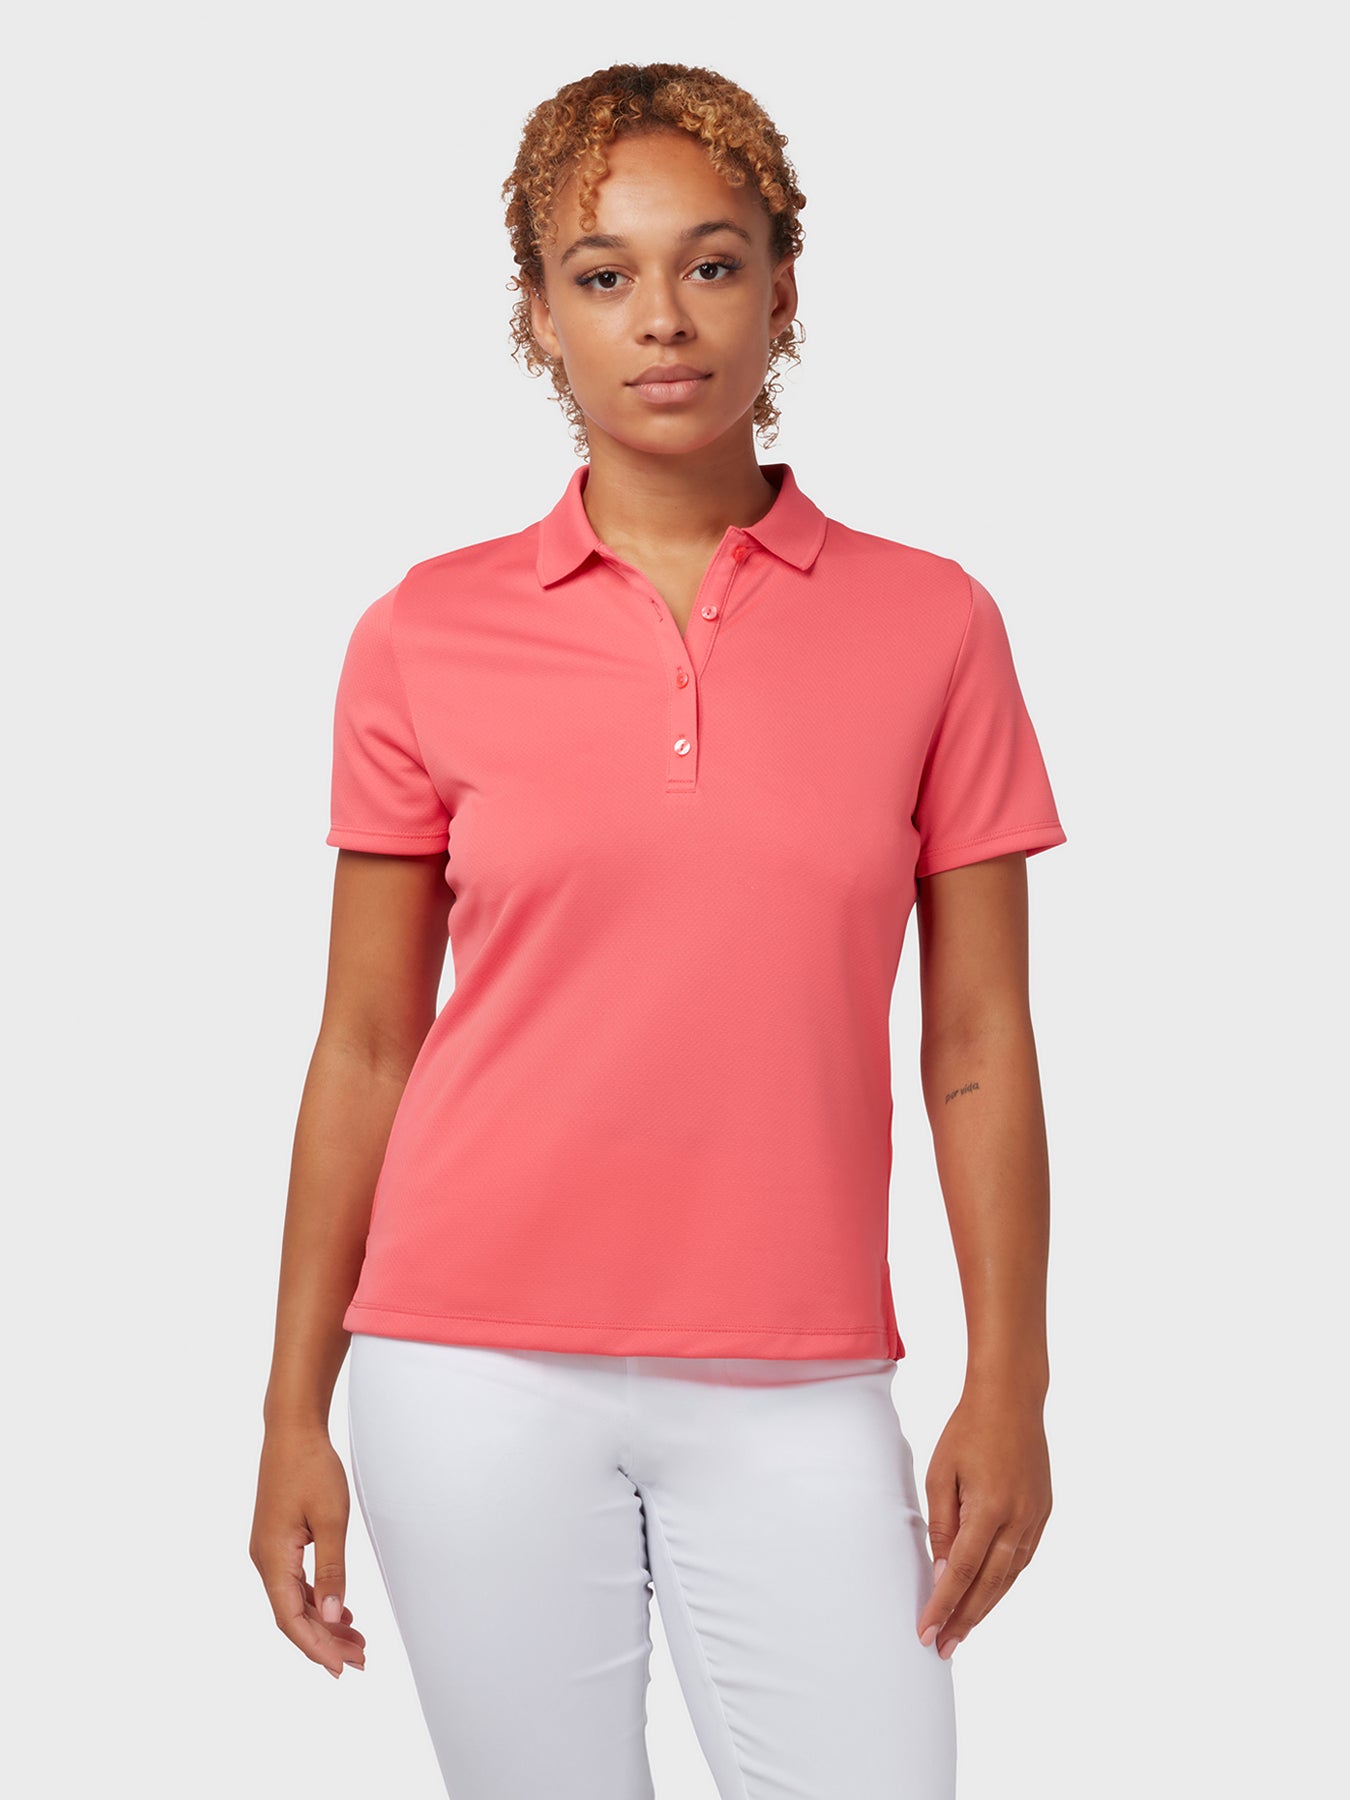 View Swing Tech Womens Polo In Coral Paradise Coral Paradise XS information